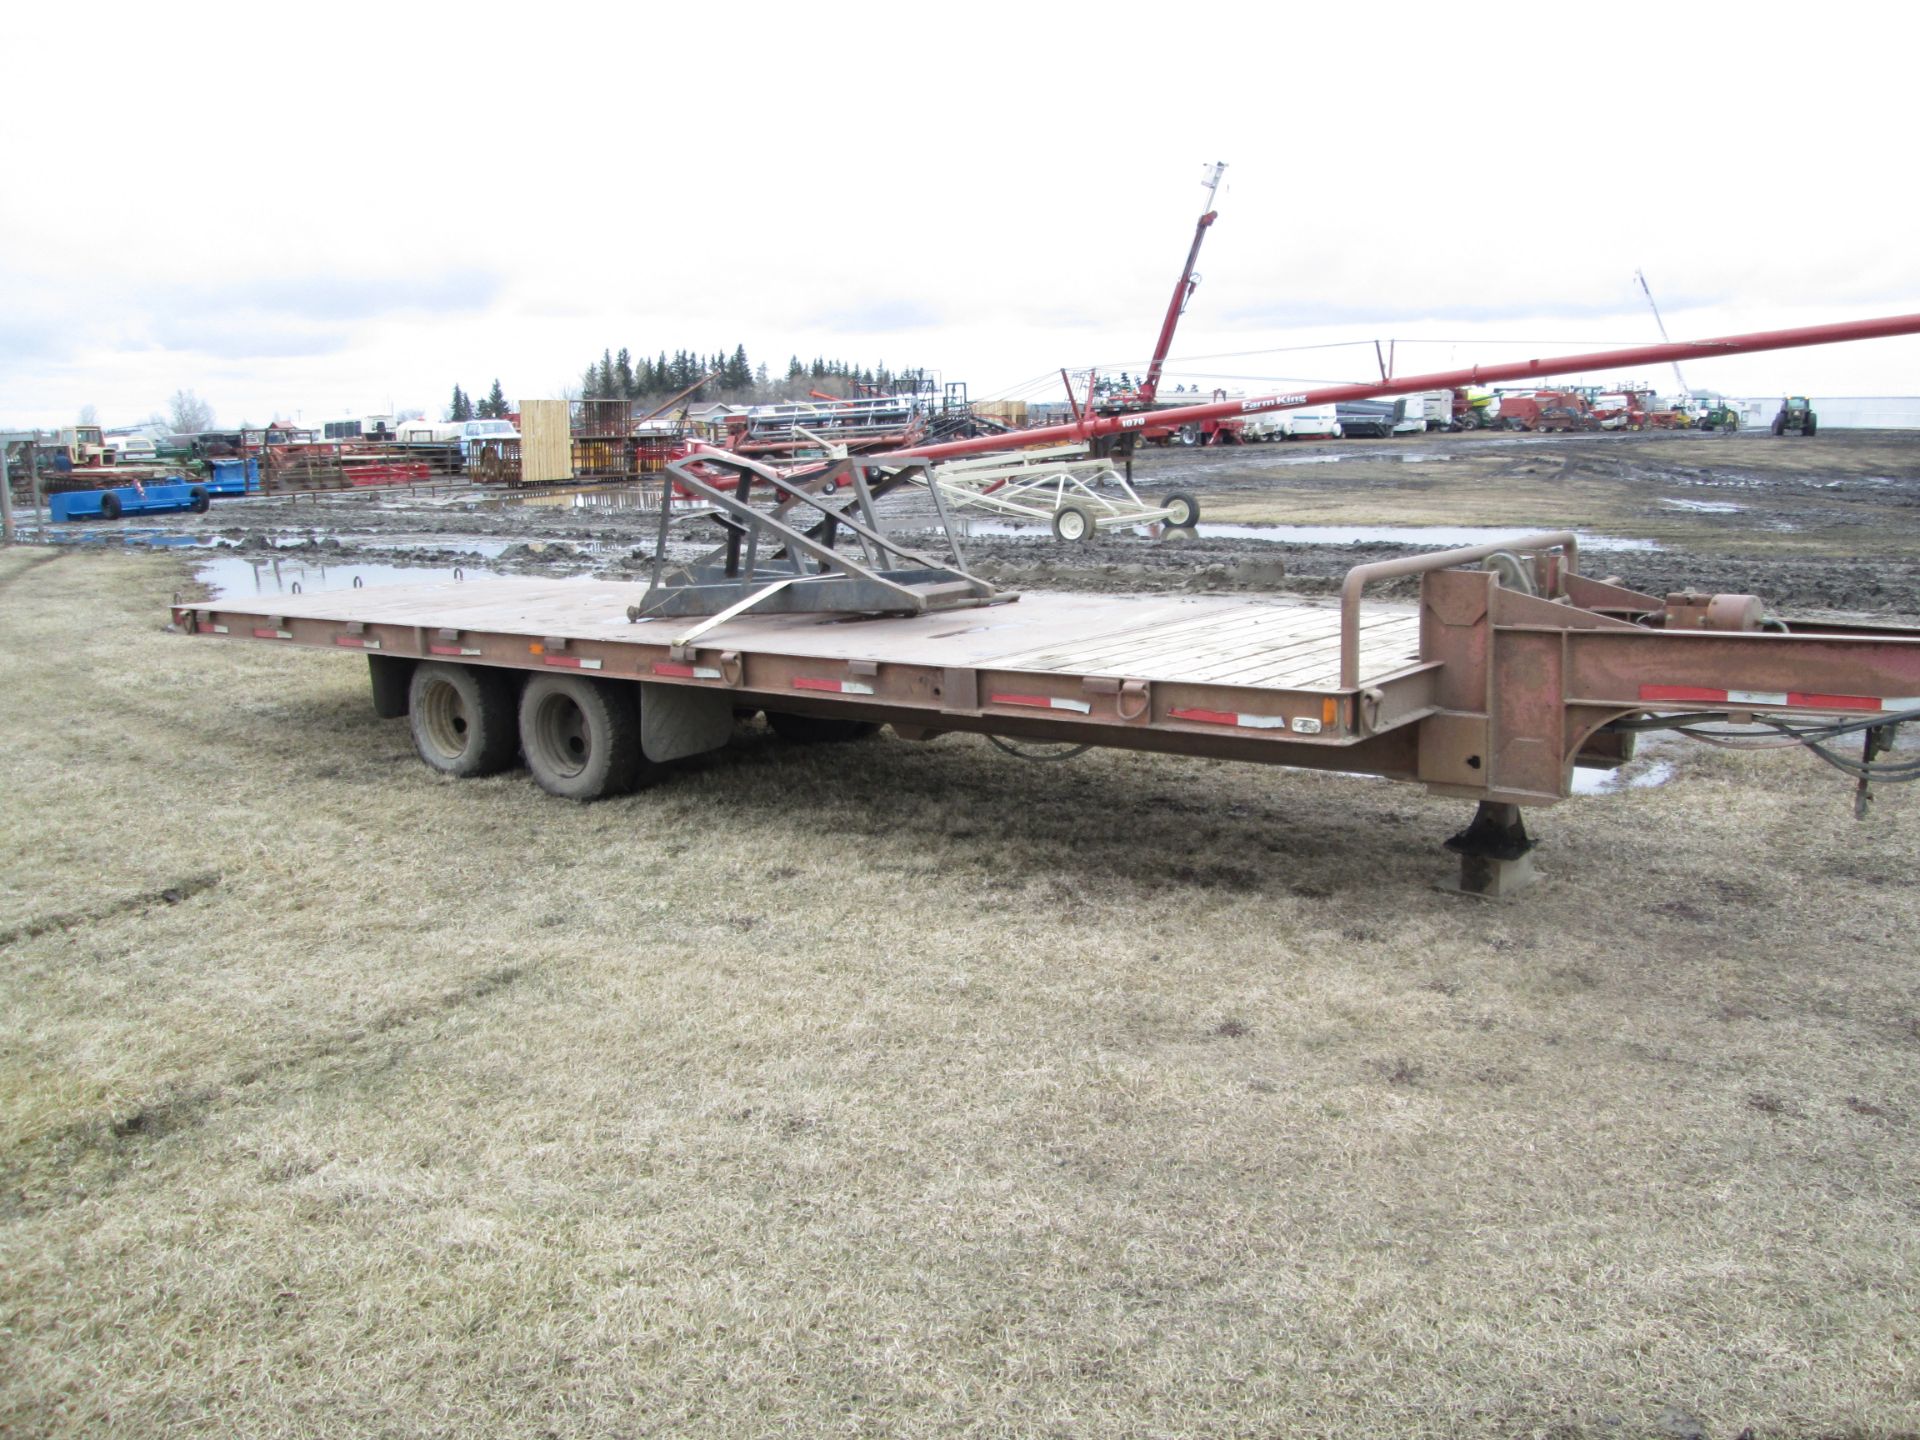 24' 1981 CRAZY TANDEM DUALLY PINTLE HITCH TRAILER - Image 2 of 3